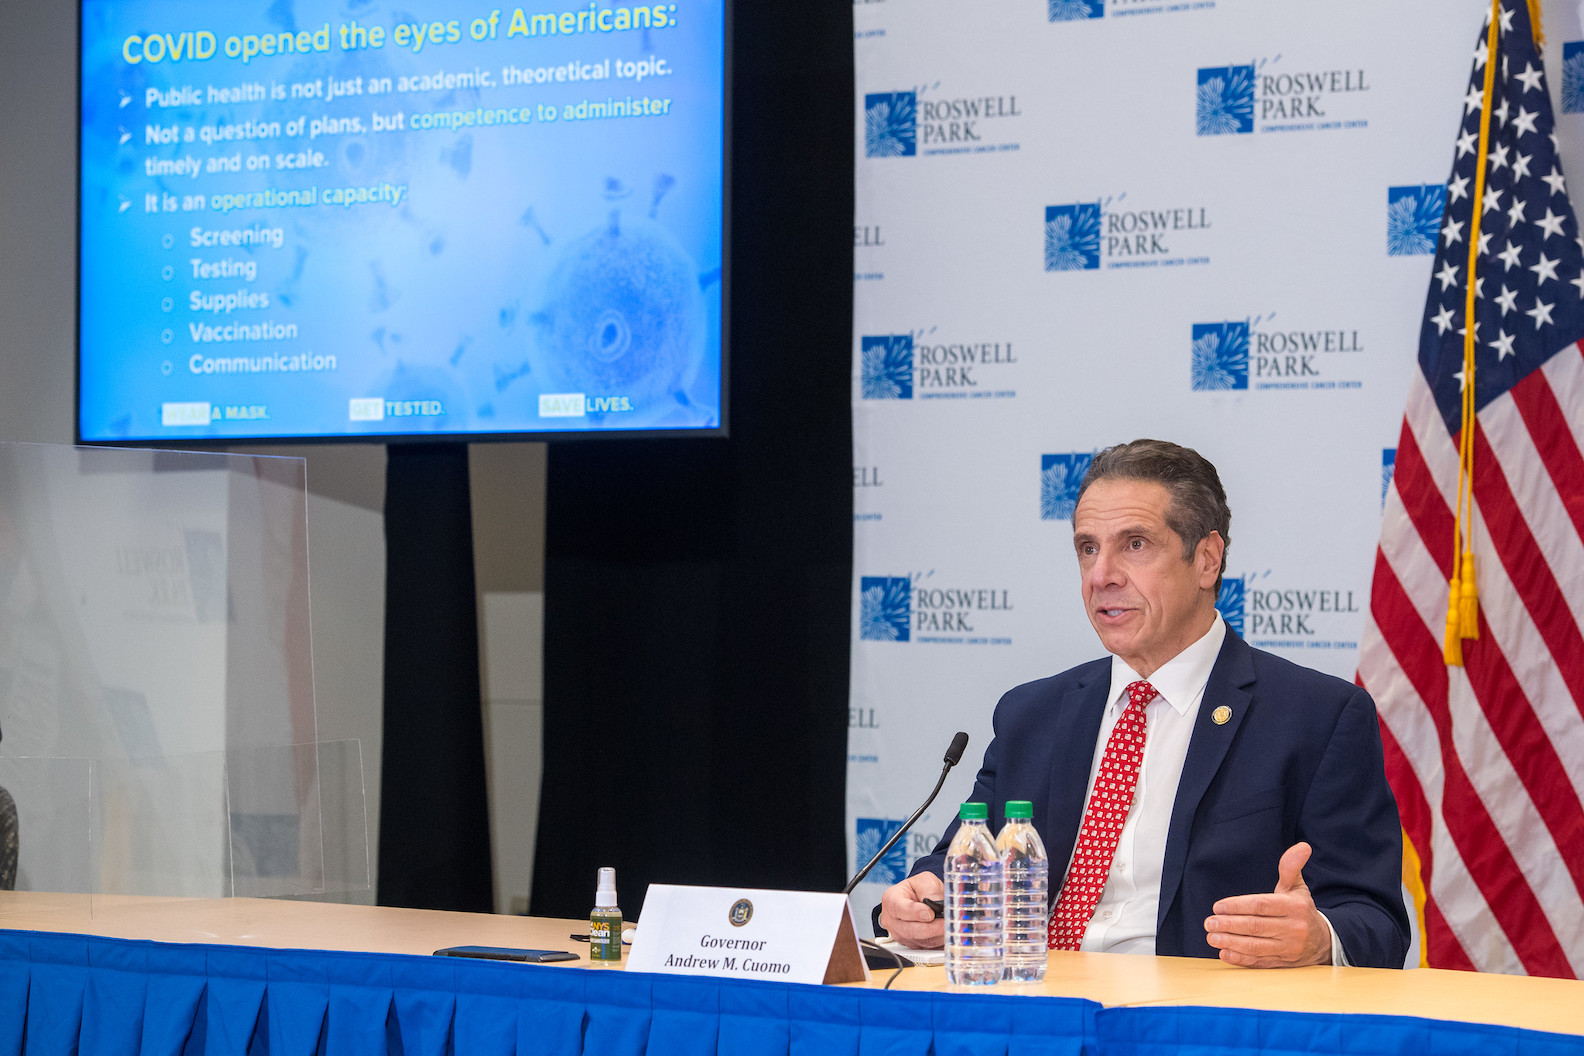 Gov. Andrew Cuomo held a COVID-19 press briefing update at Roswell Park in Buffalo on Monday. He was joined by Lt. Gov. Kathy Hochul (Photos by Darren McGee/Office of Gov. Andrew M. Cuomo; graphics also courtesy of the governor's office)